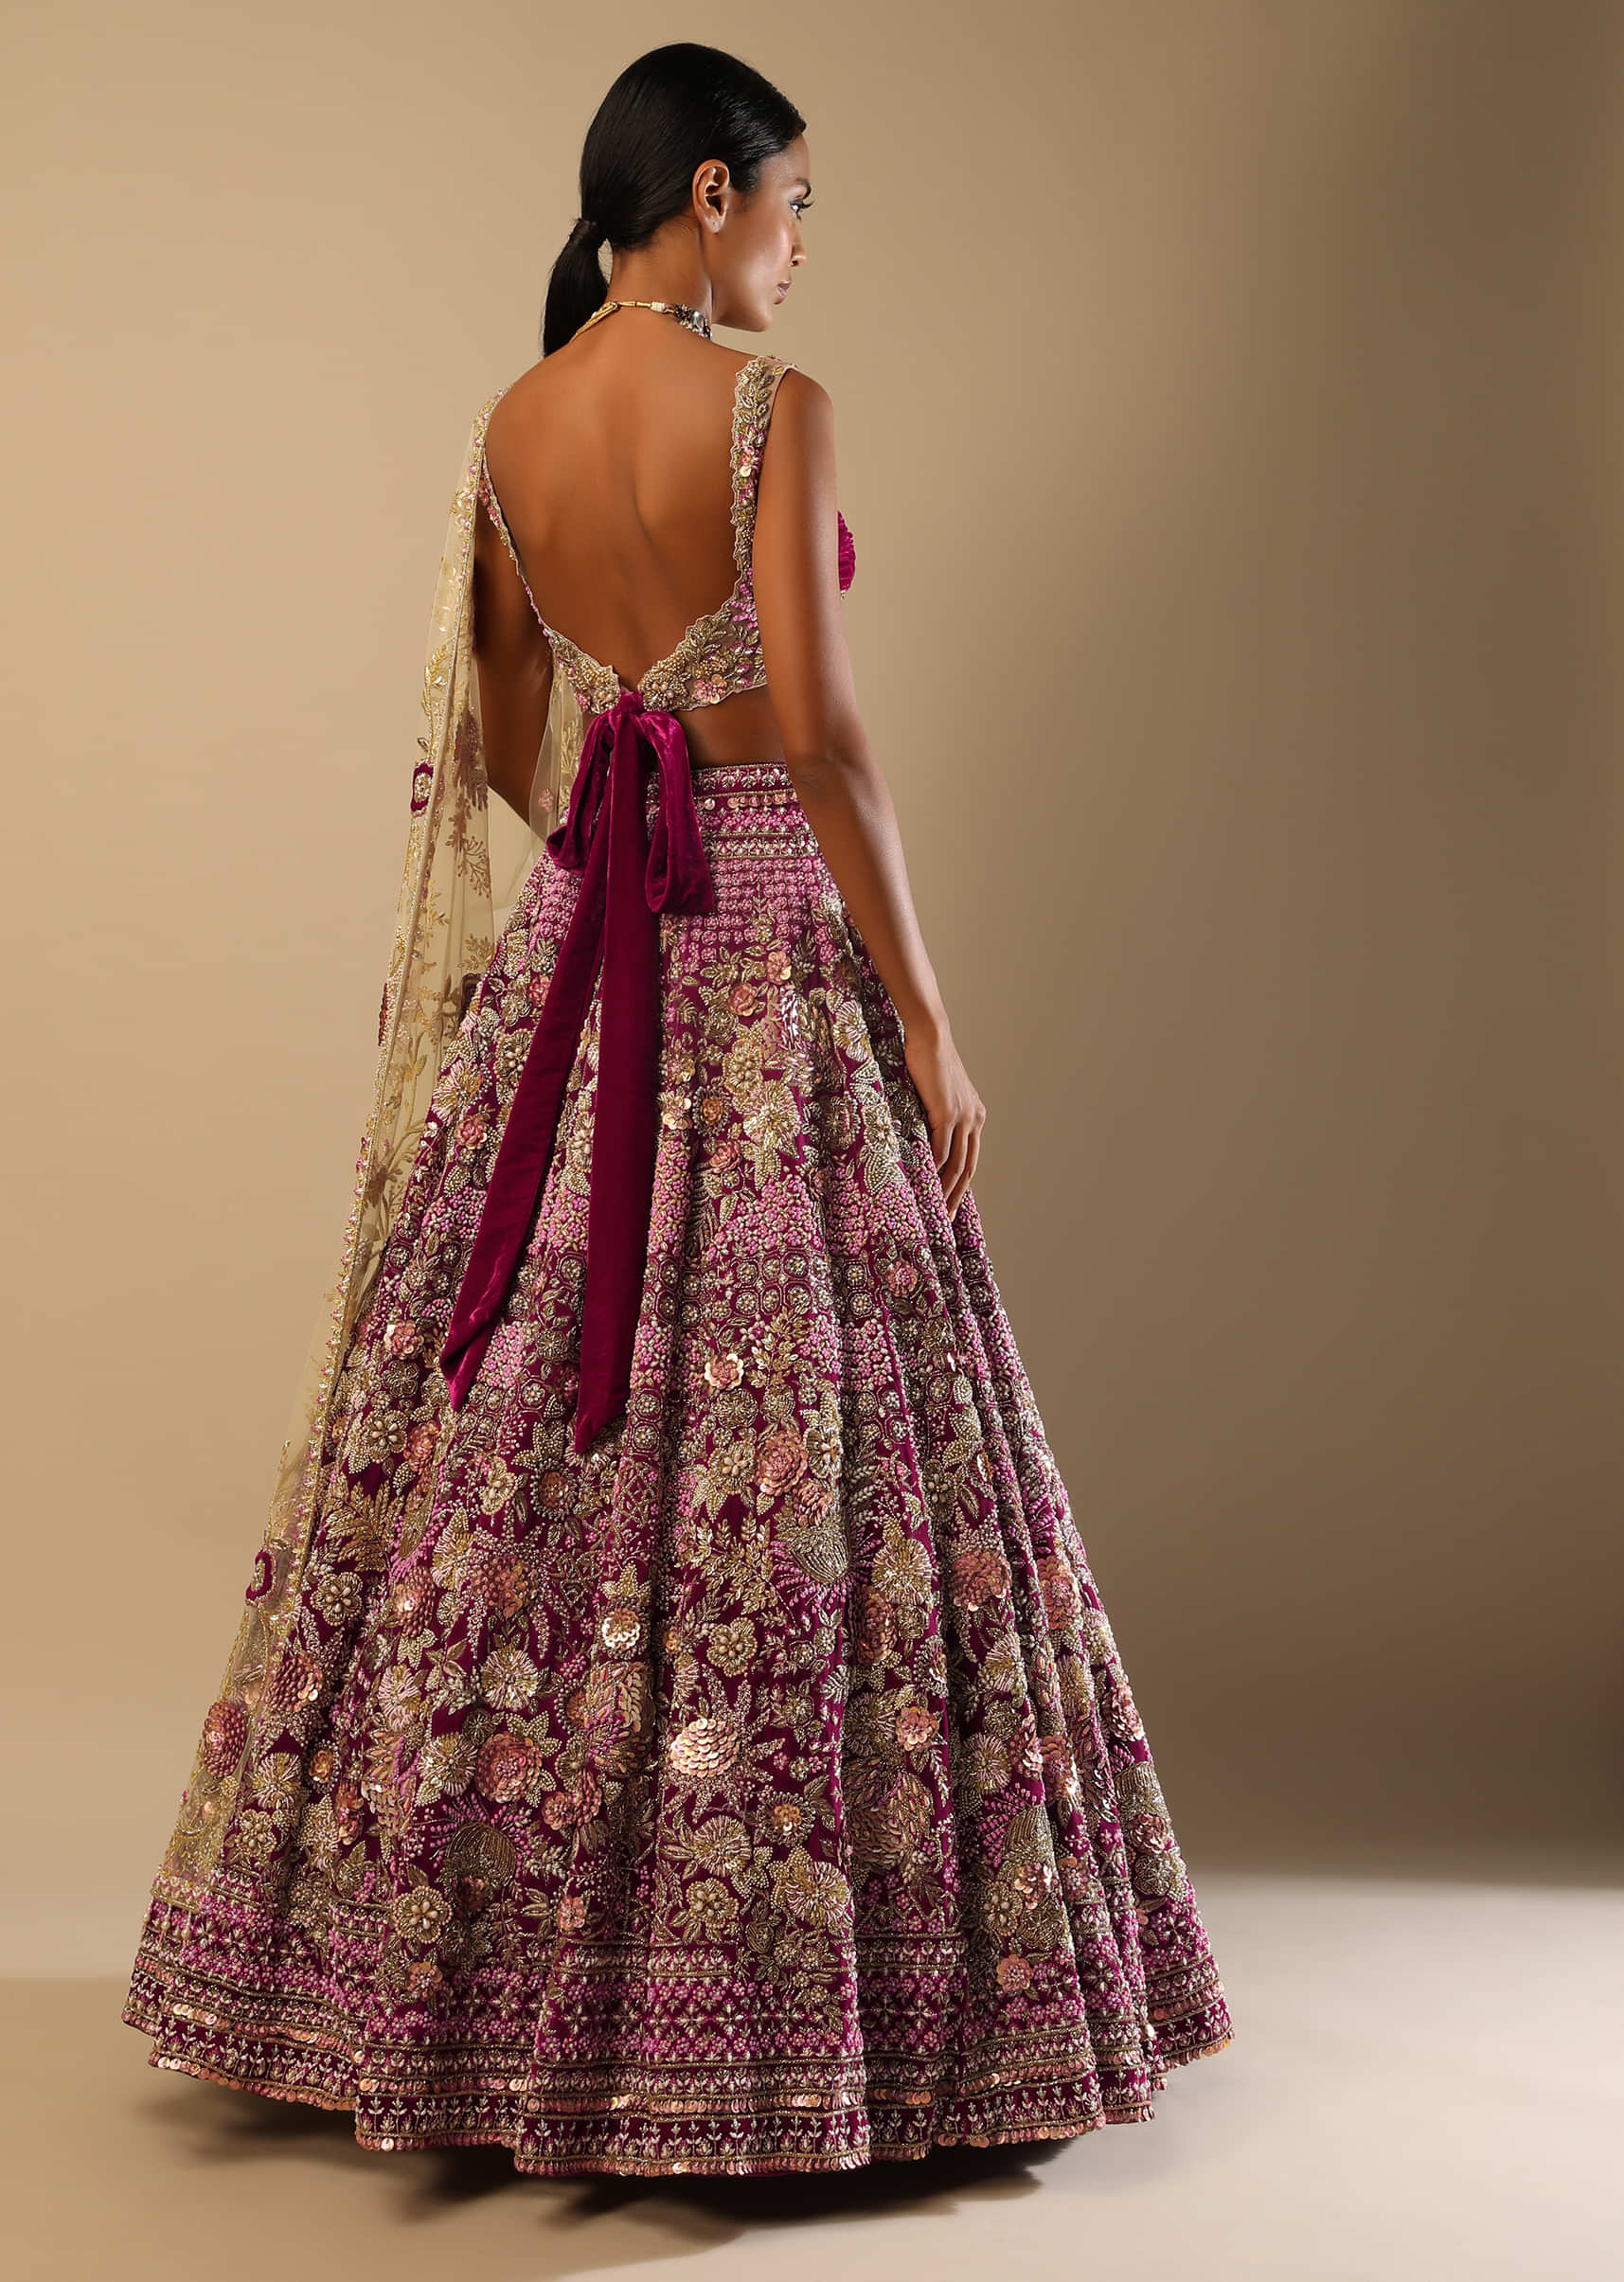 Sangria Lehenga In Velvet With Ruched Choli And Multi Colored Hand Embroidered Heritage Floral Motifs 